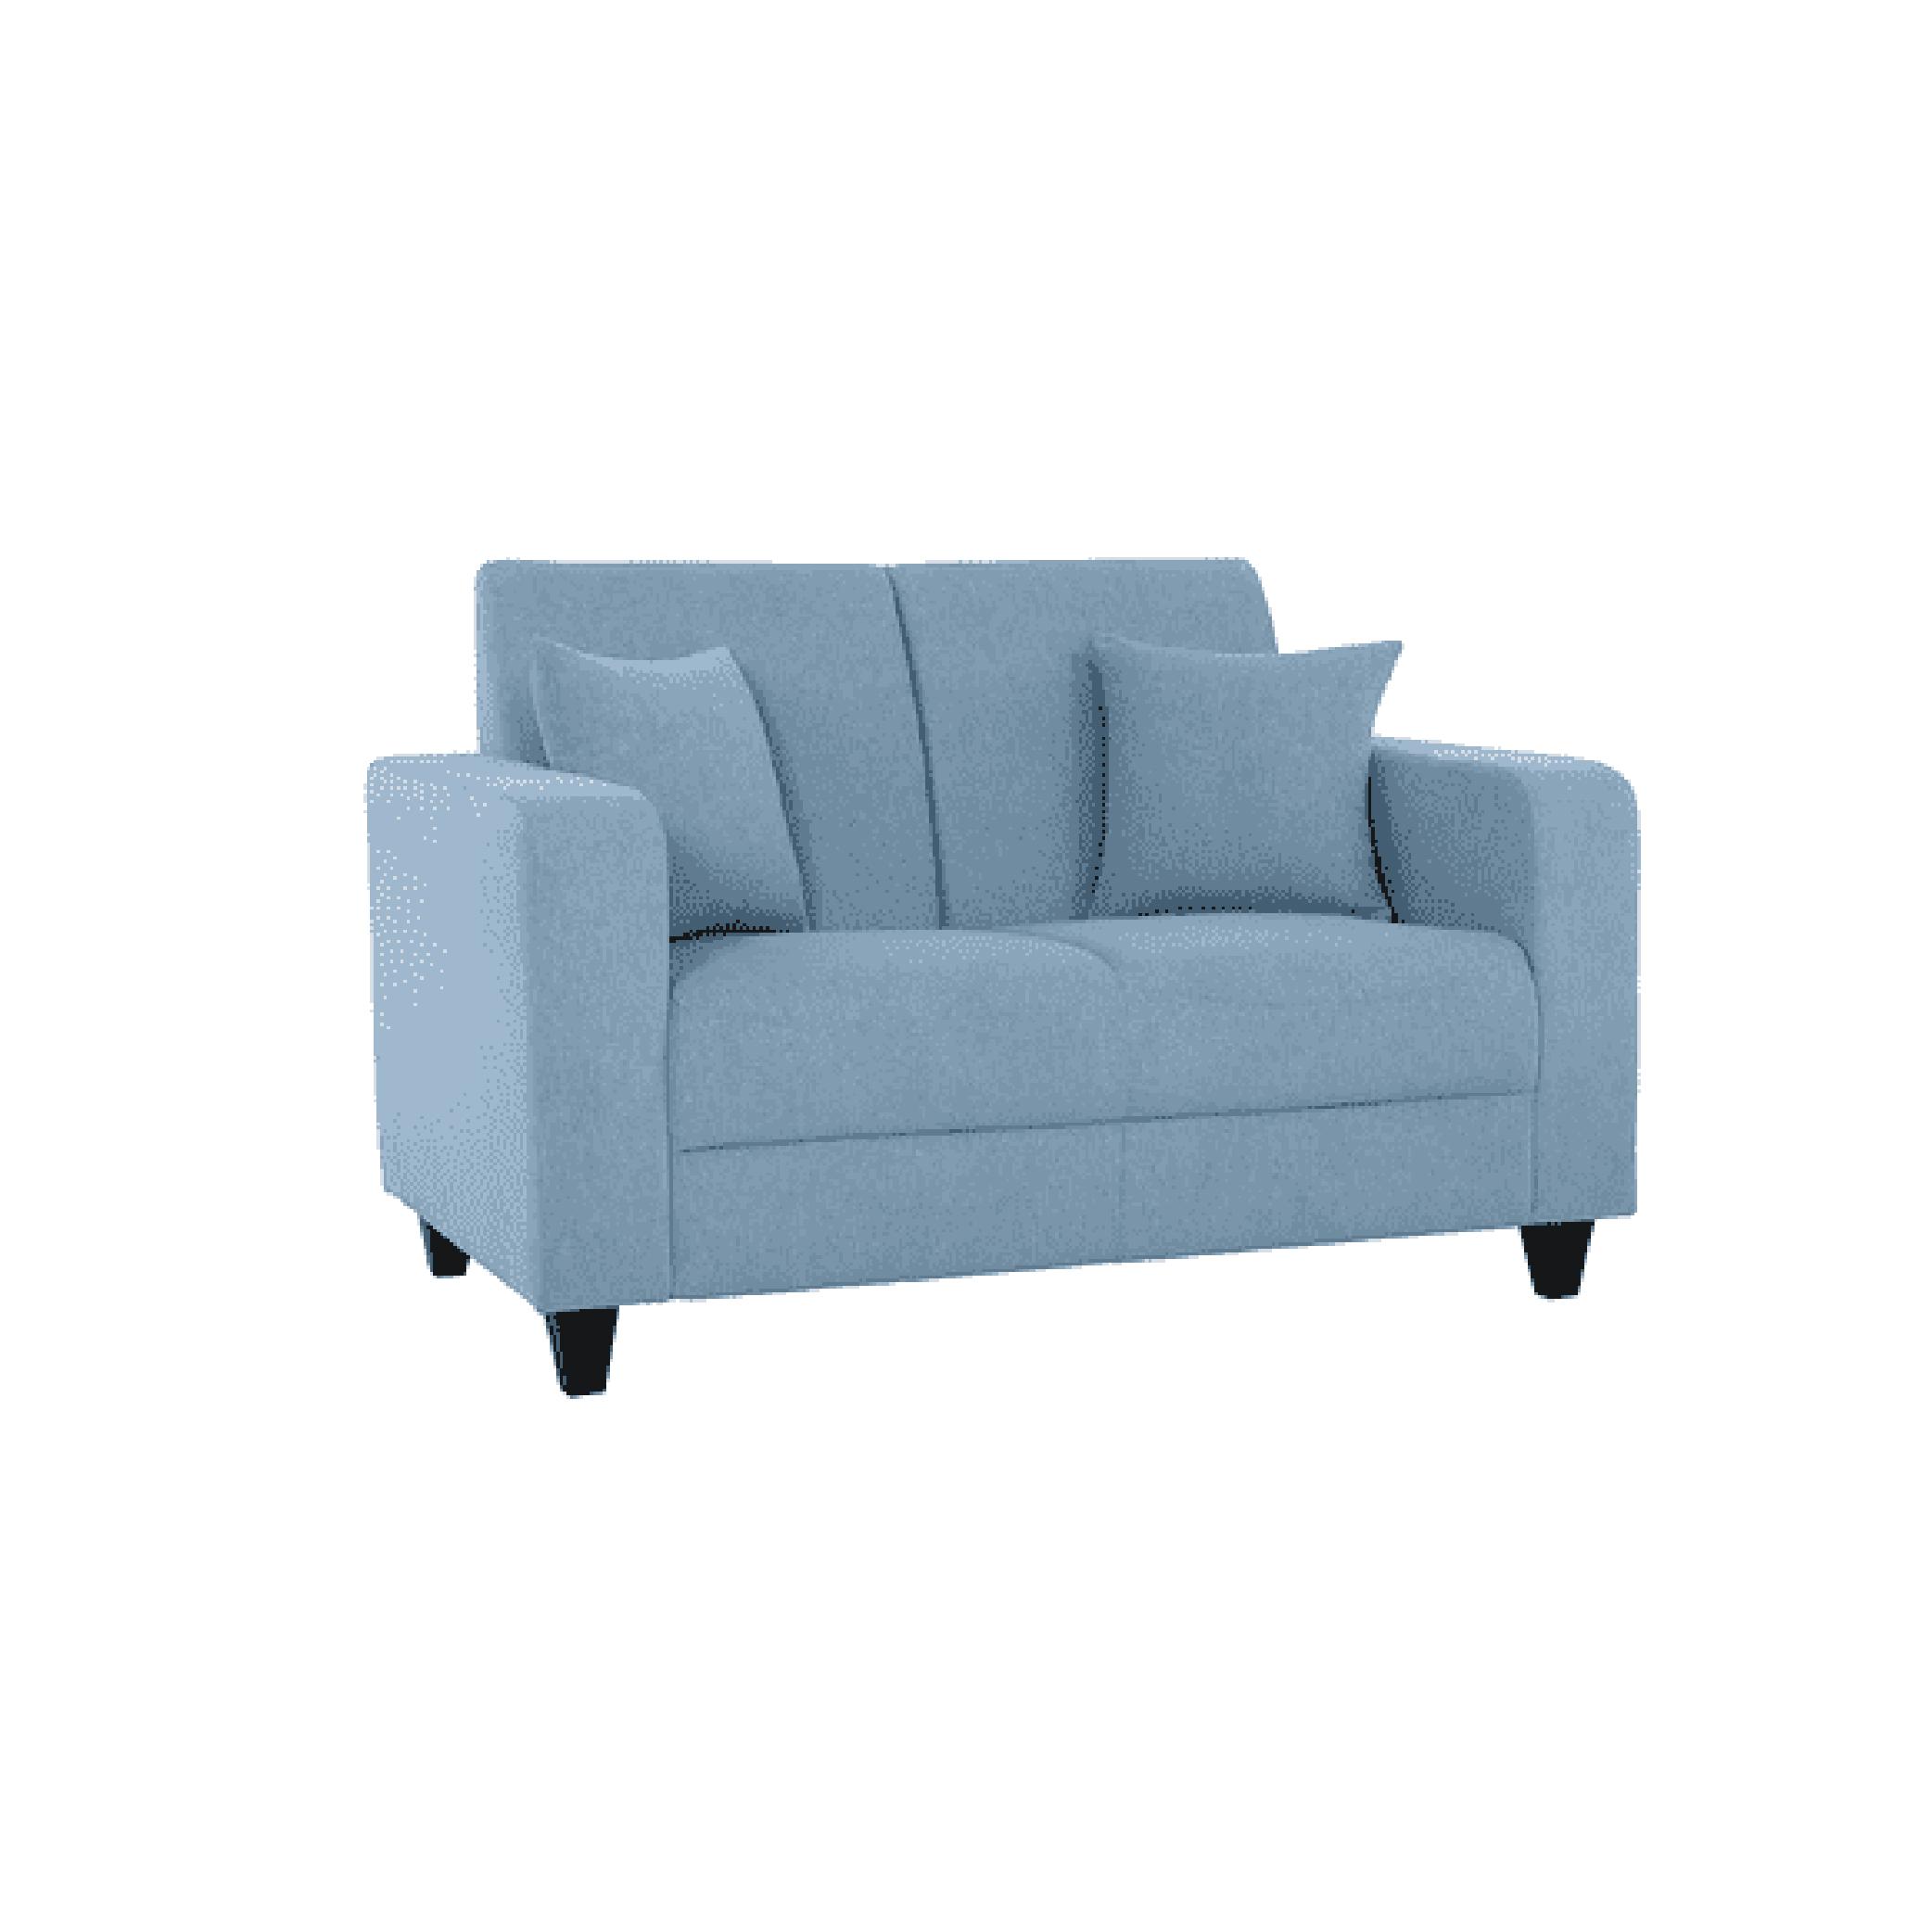 Naples Two Seater Sofa in Ice Blue Colour